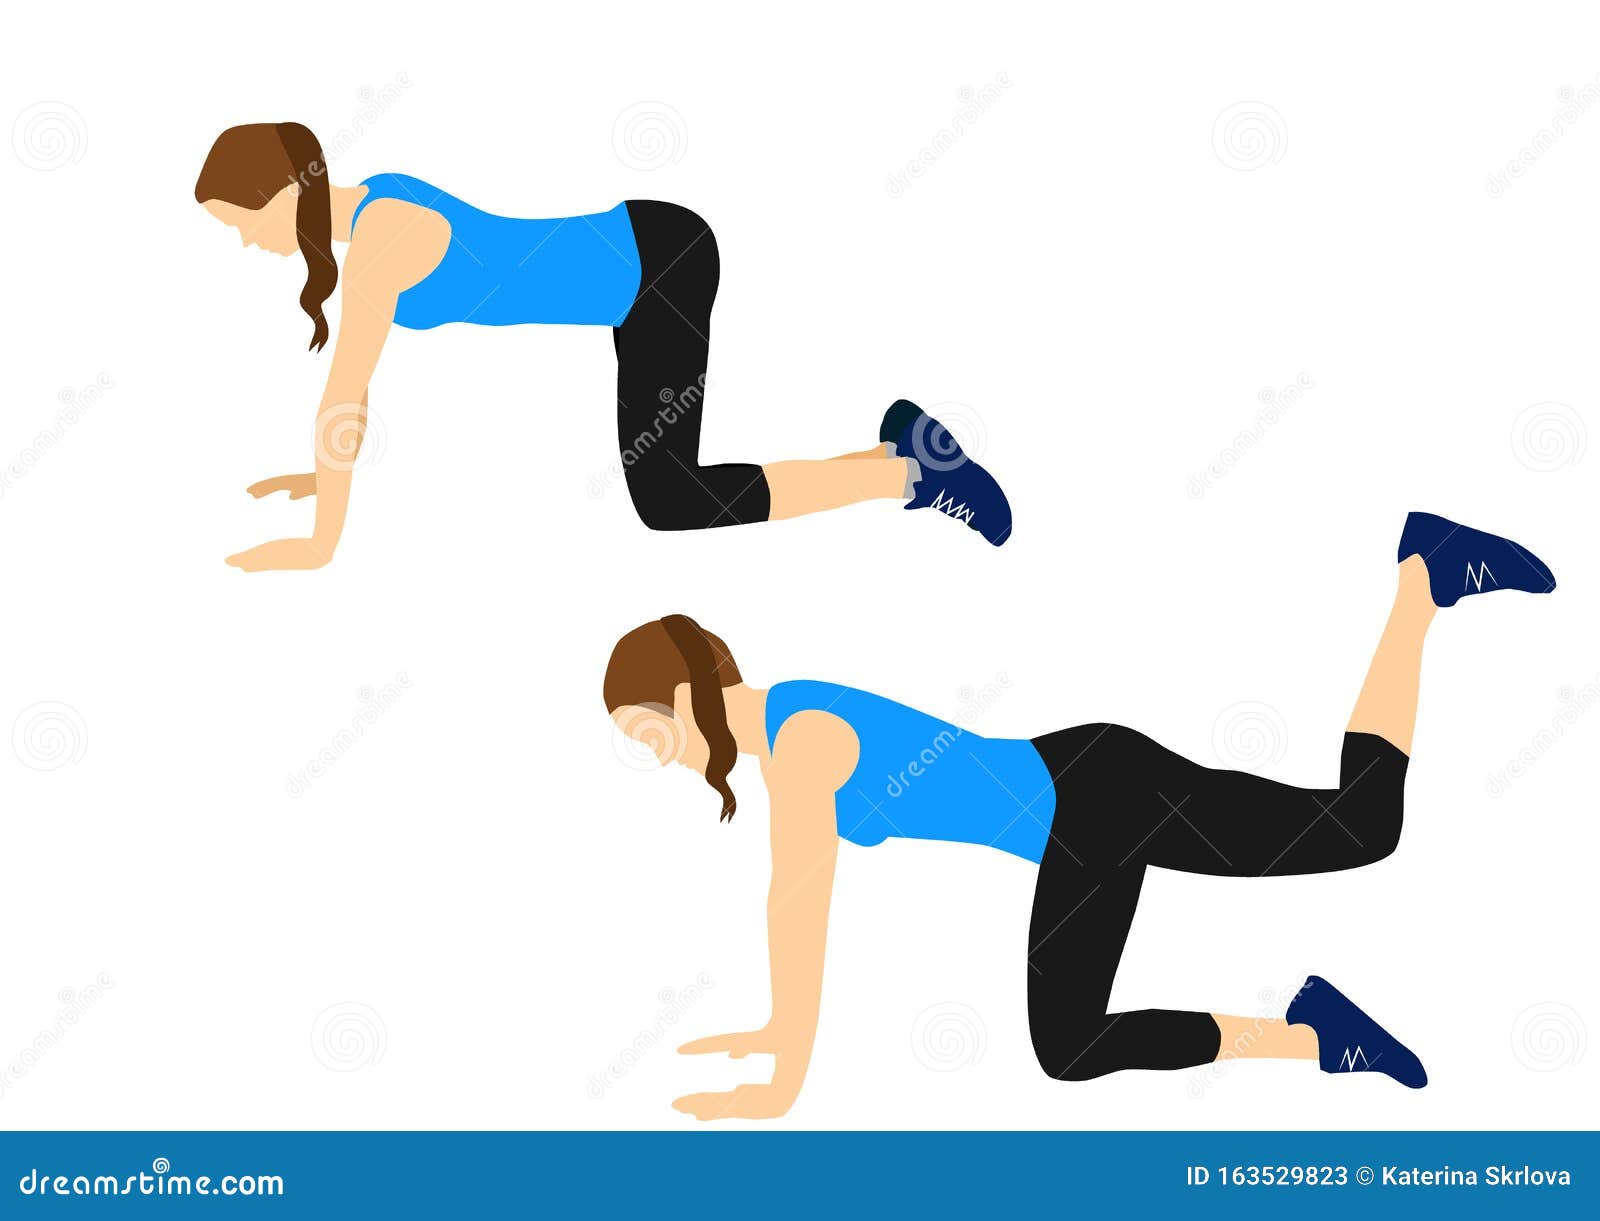 Fitness Exercises For Your Better Workout - Donkey Kicks Stock ...